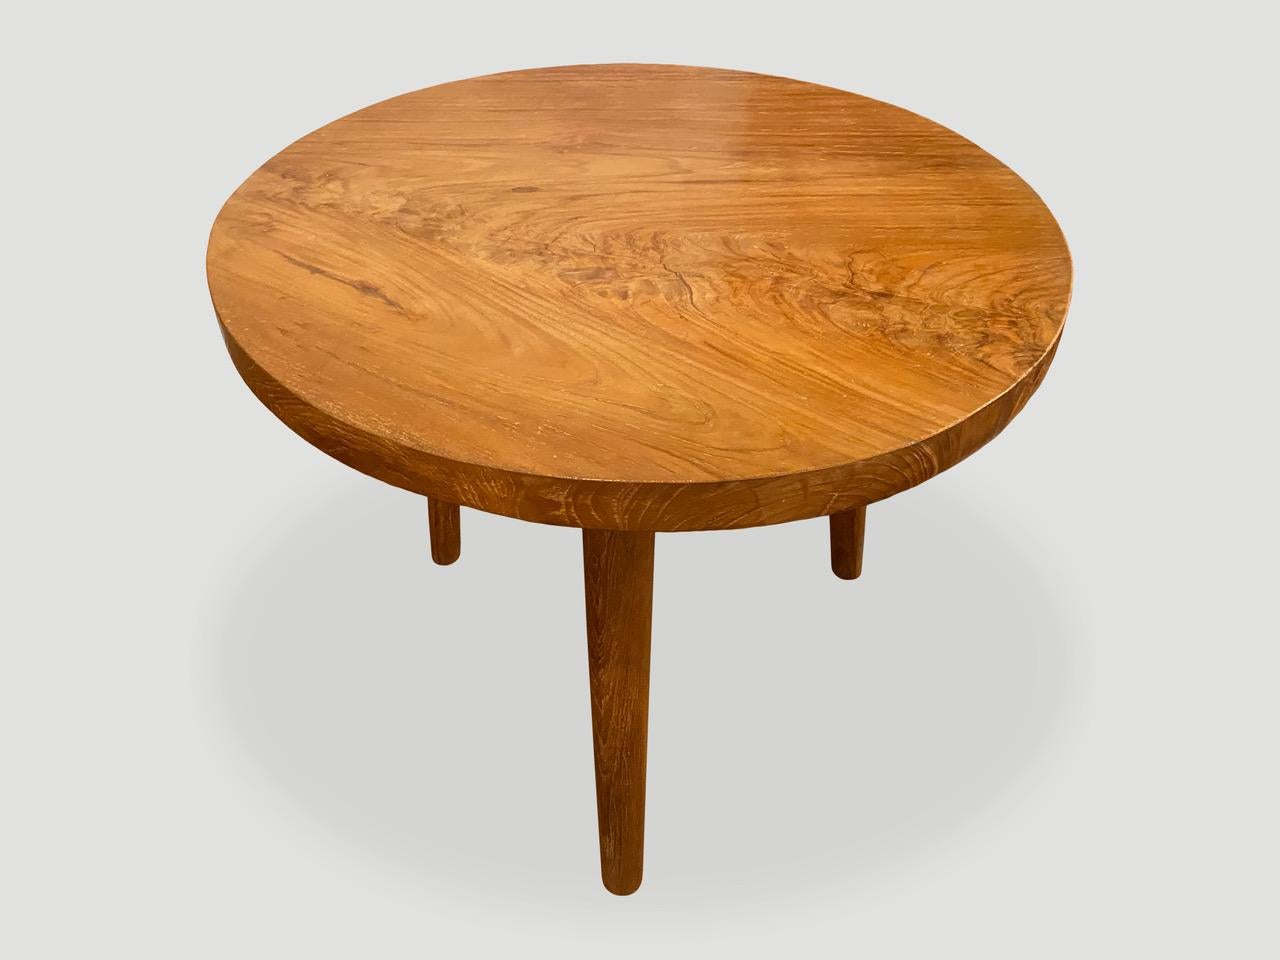 Andrianna Shamaris Mid Century Style Teak Wood Side Table In Excellent Condition For Sale In New York, NY